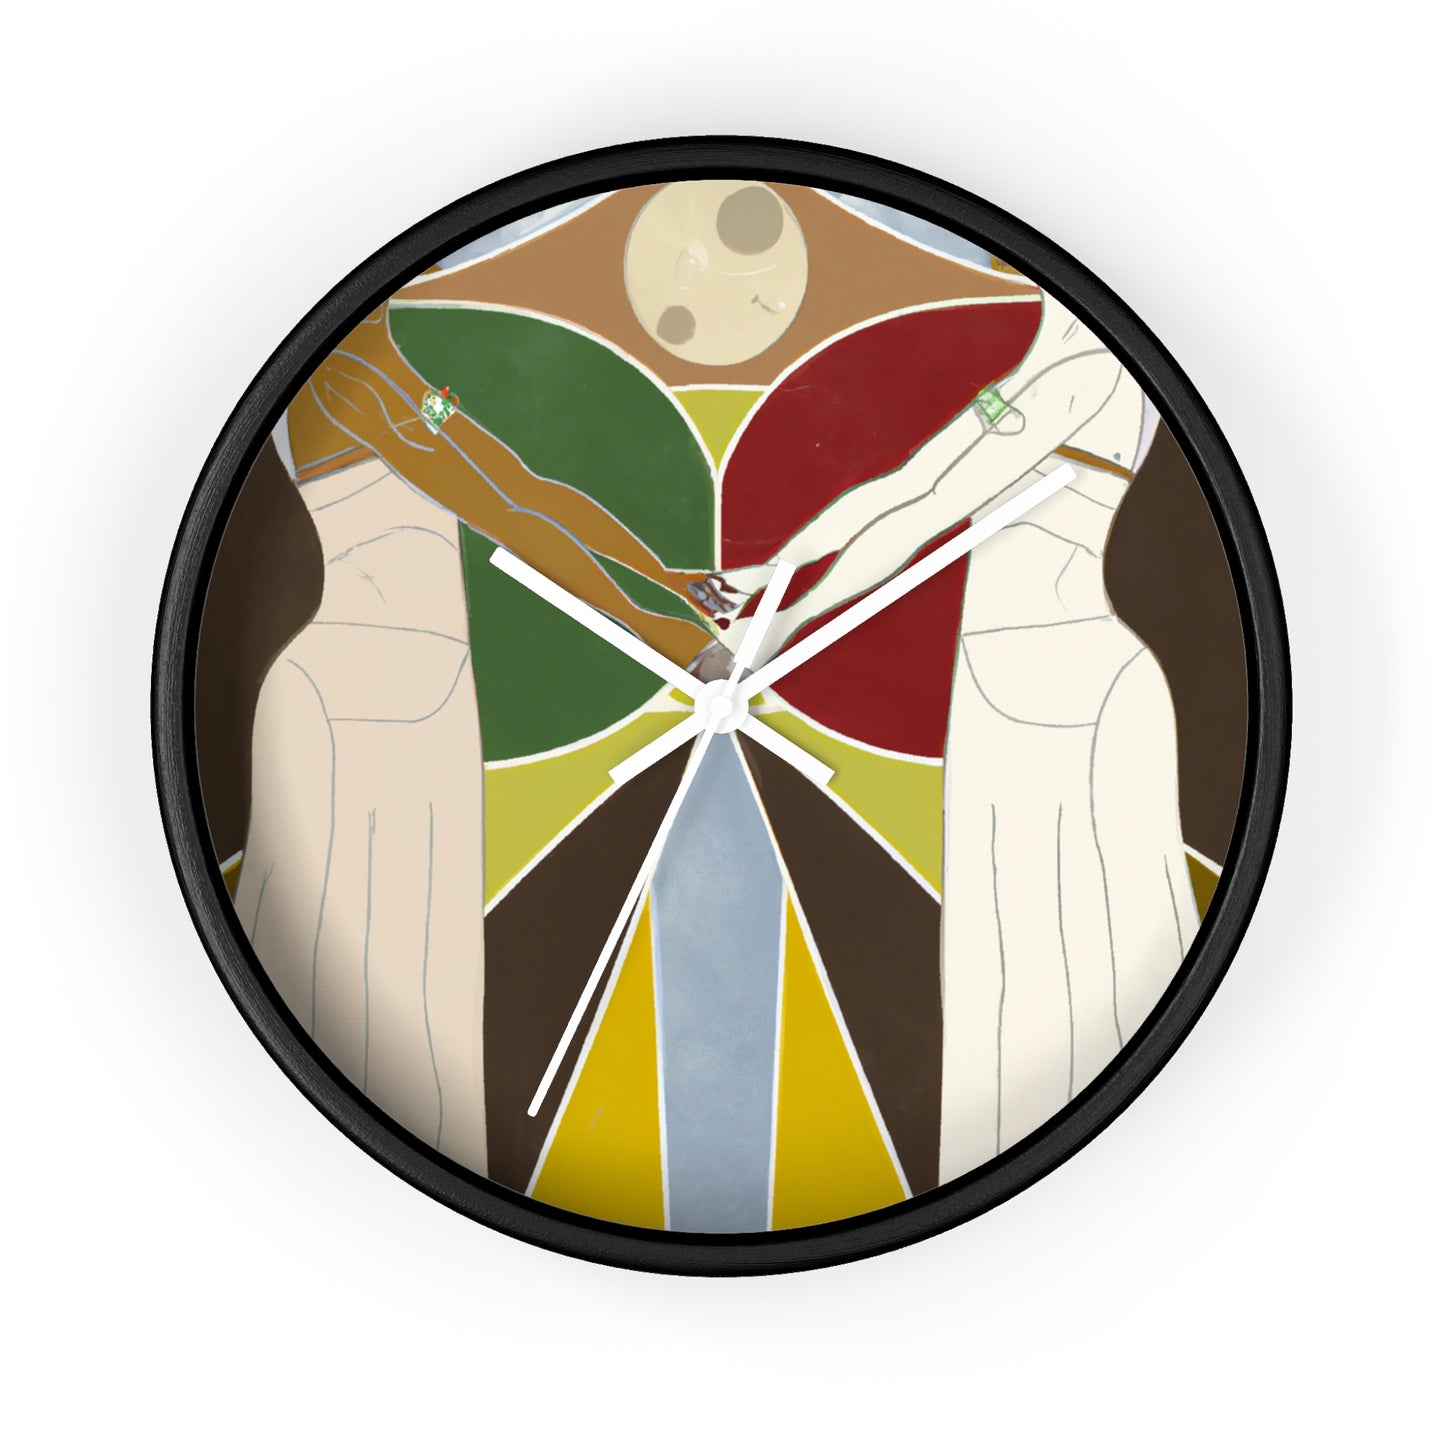 the world

The Unlikely Alliance: A Journey to Save the World - The Alien Wall Clock